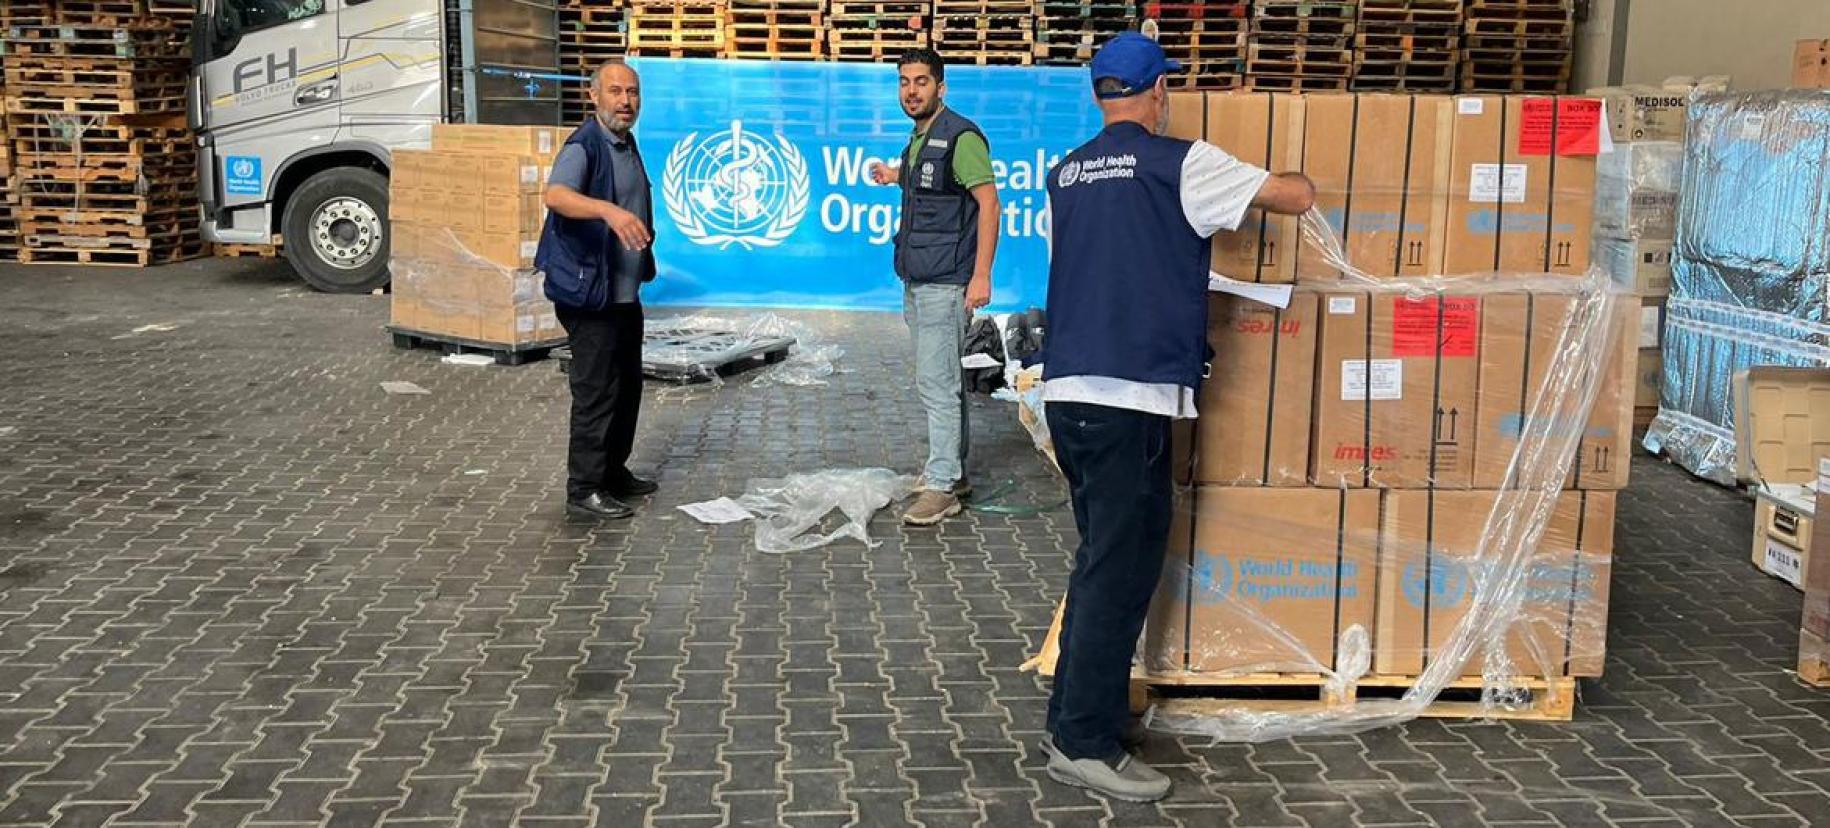 Men unload boxes of supplies and boxes, and stand in front of a World Health Organization sign.